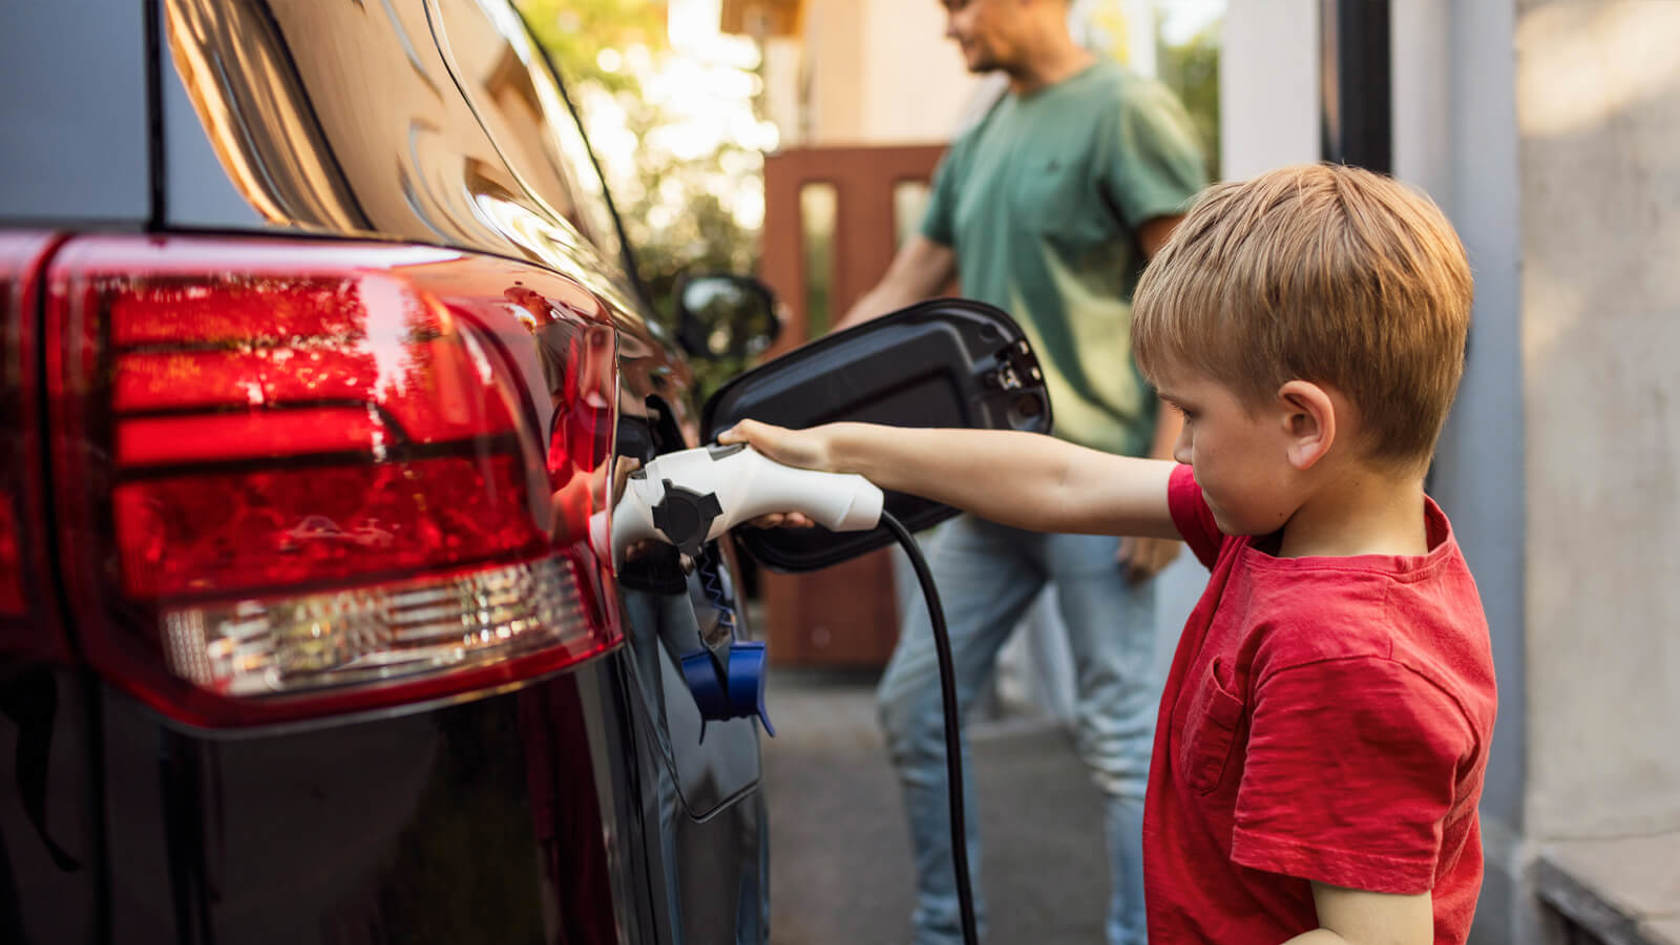 Child in red shirt plugs an electric vehicle charger into a car